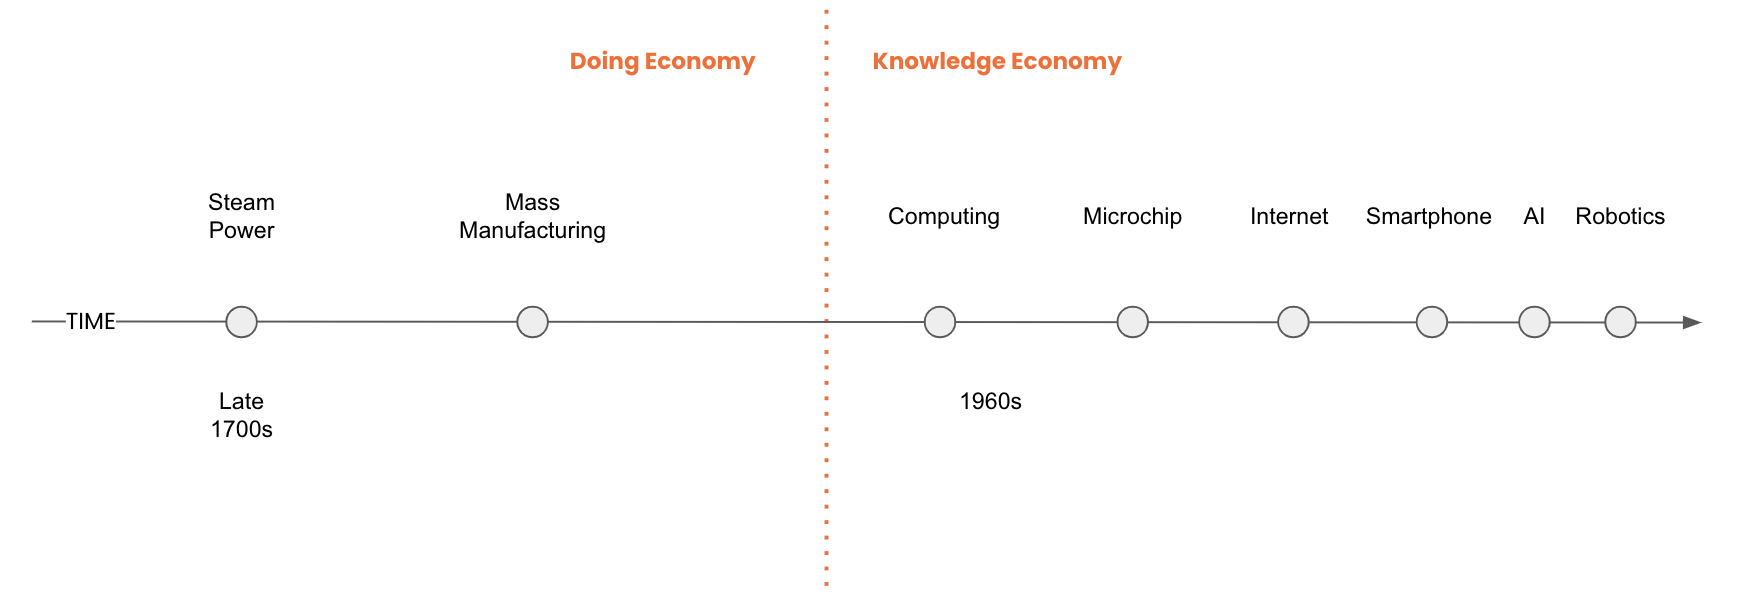 Major economic platform shifts since the 1700s with knowing-doing